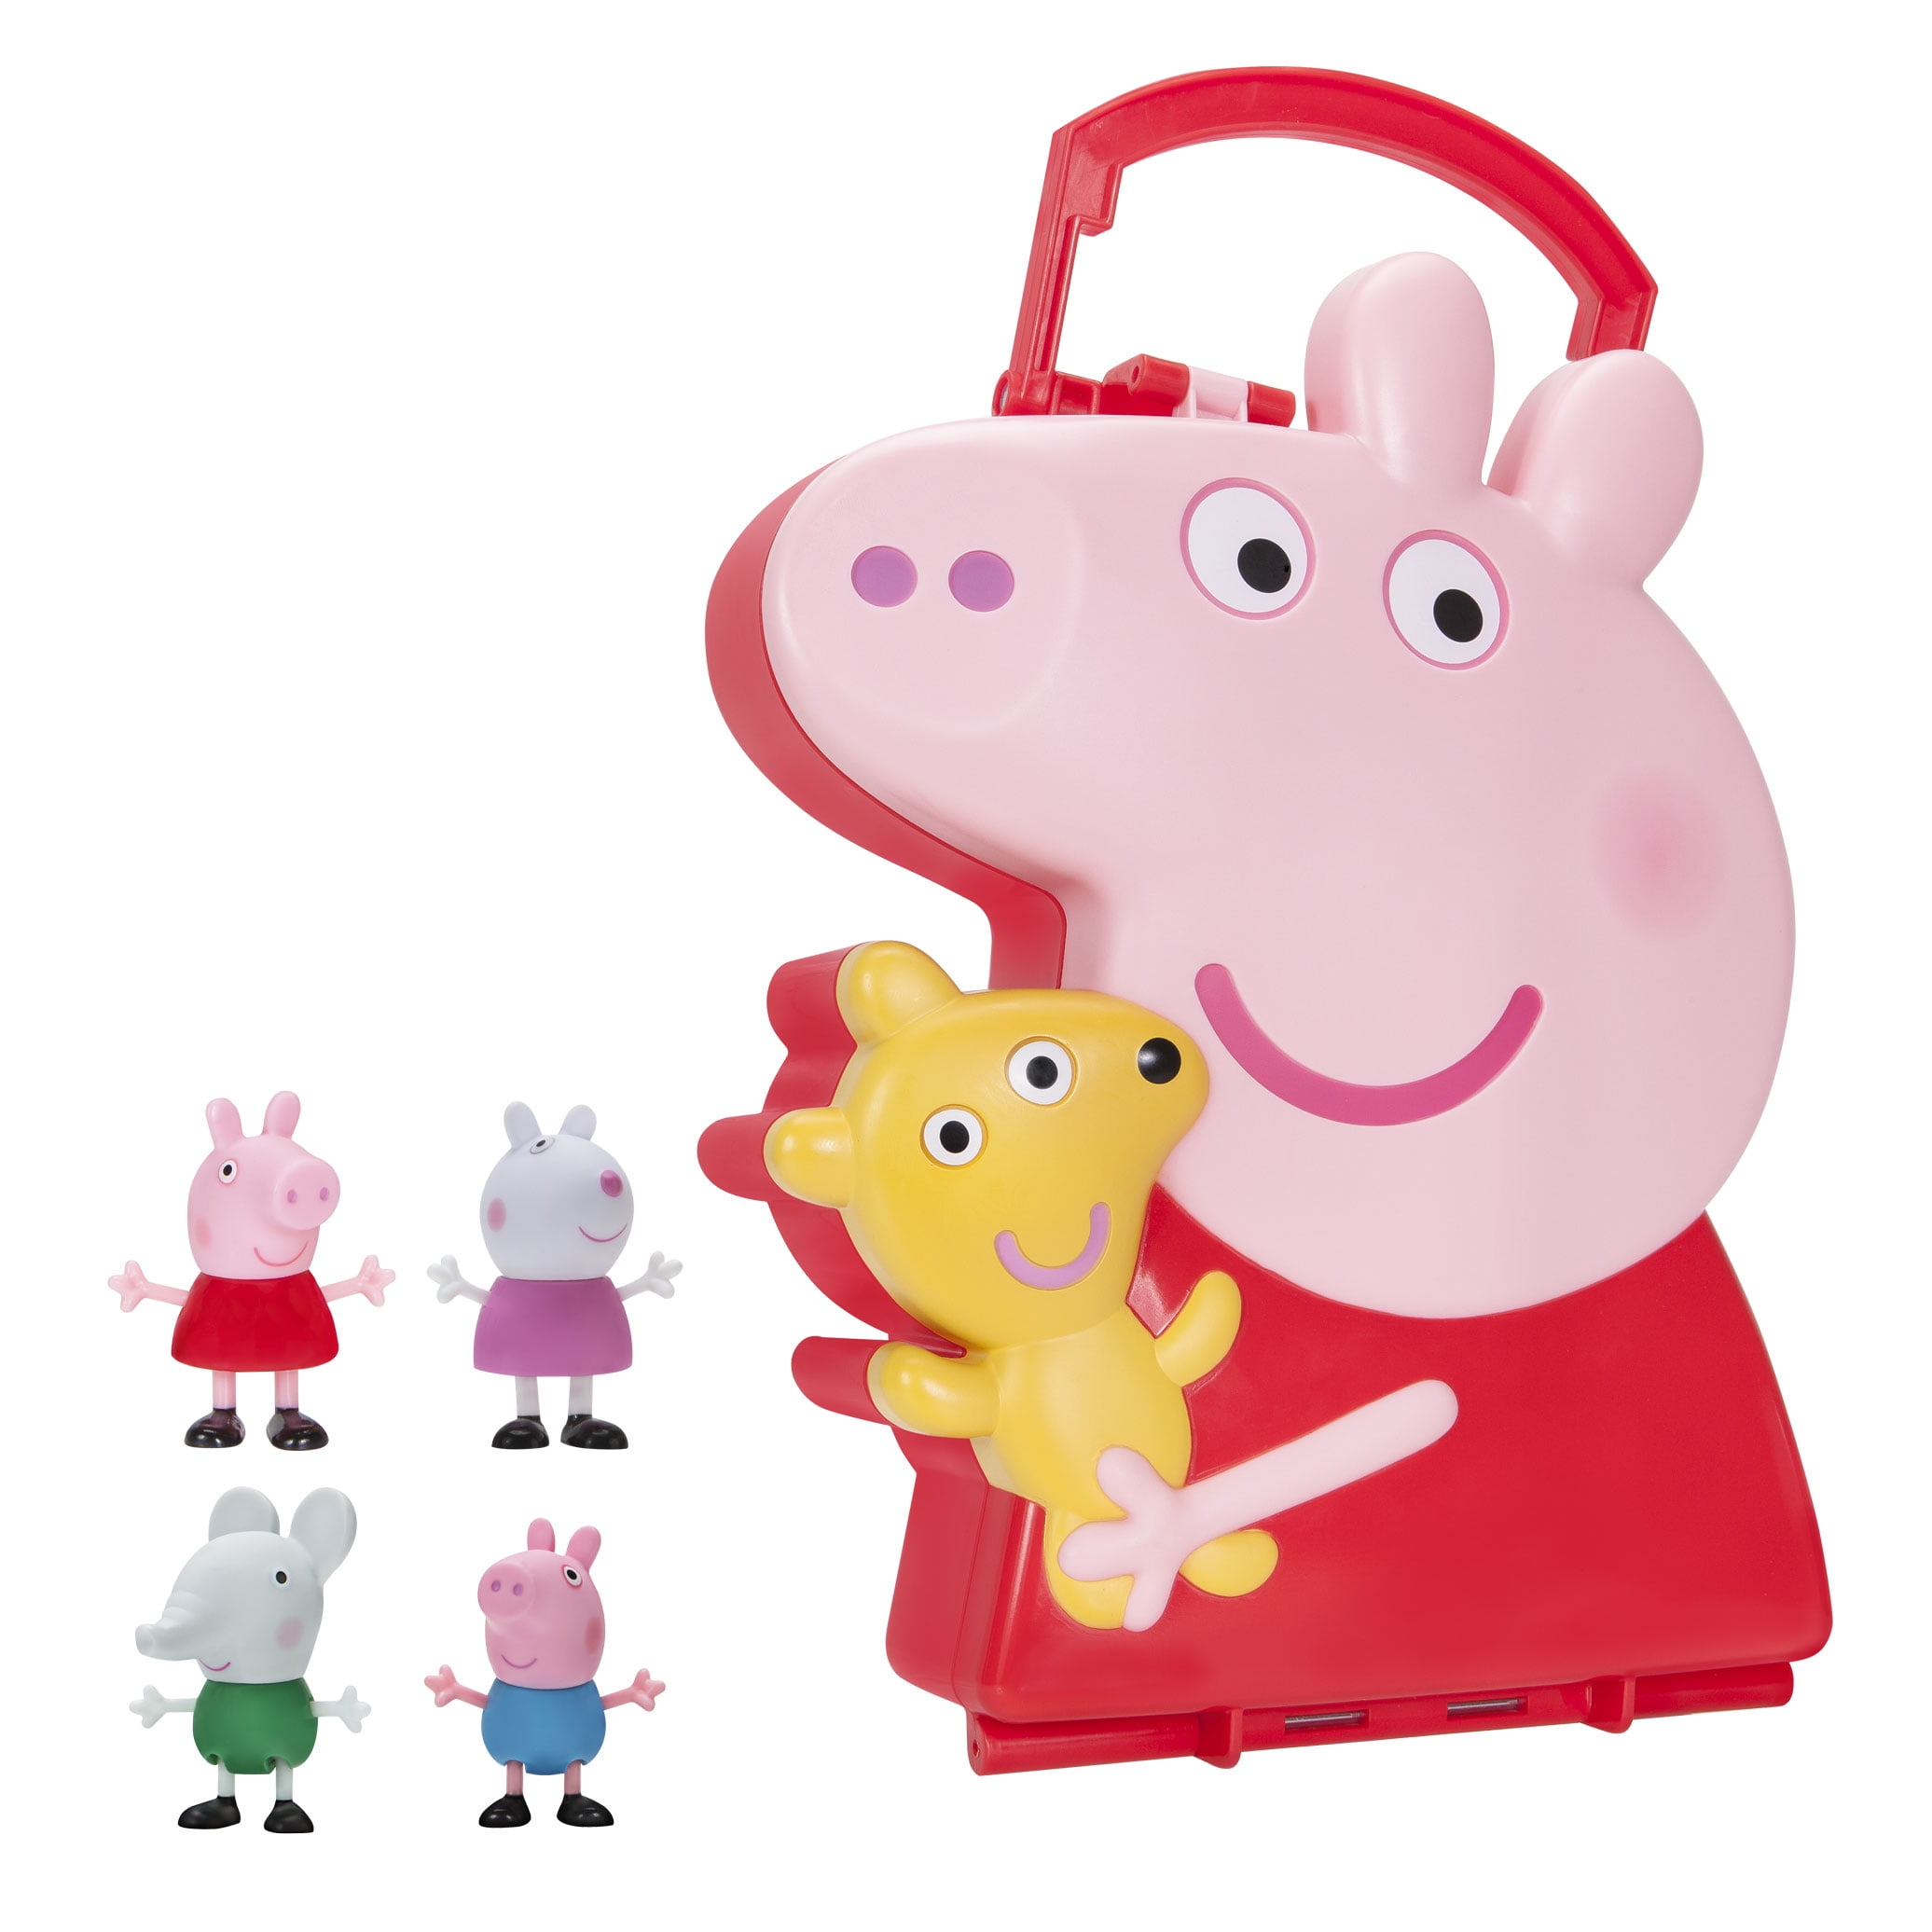 Peppa Pig 4-Figure Carry Case Storage Kids Play Toy